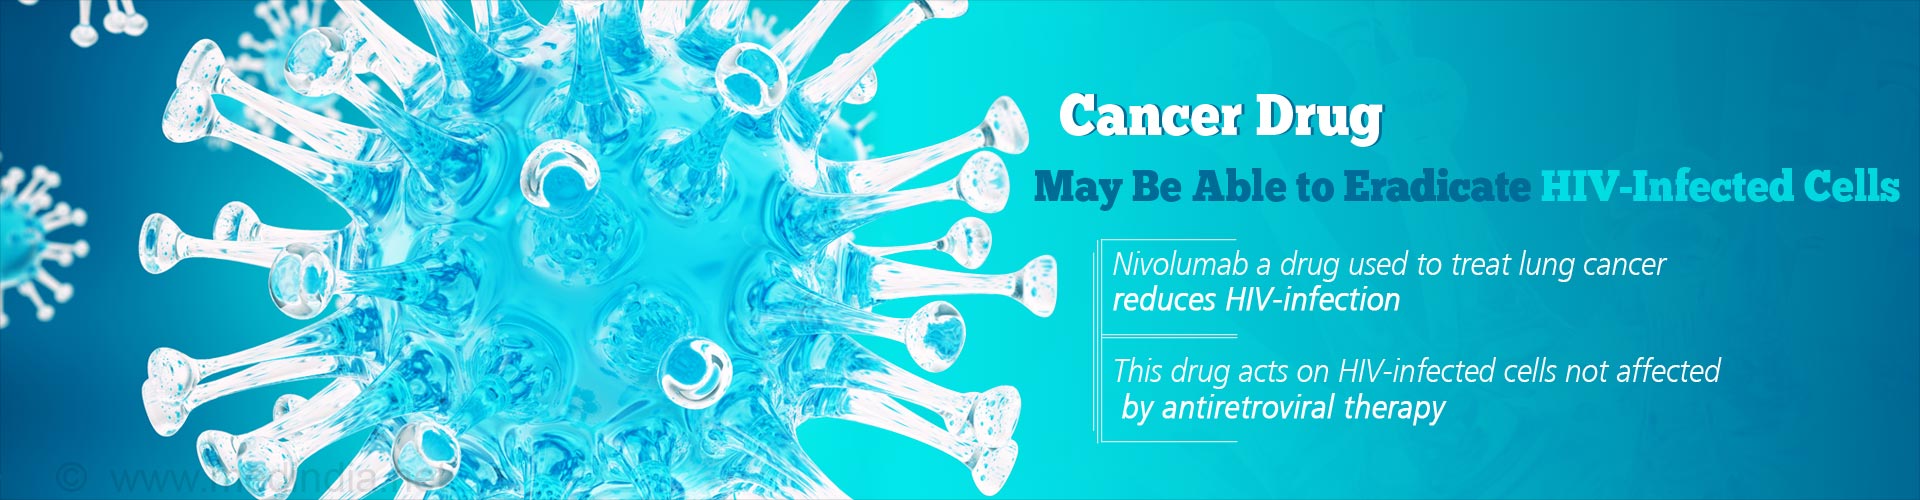 Cancer Drug Maybe Able to Eradicate HIV-Infected Cells
- Nivolumab a drug used to treat lung cancer reduces HIV-infection
- This drug acts on HIV-infected cells not affected by antiretroviral therapy